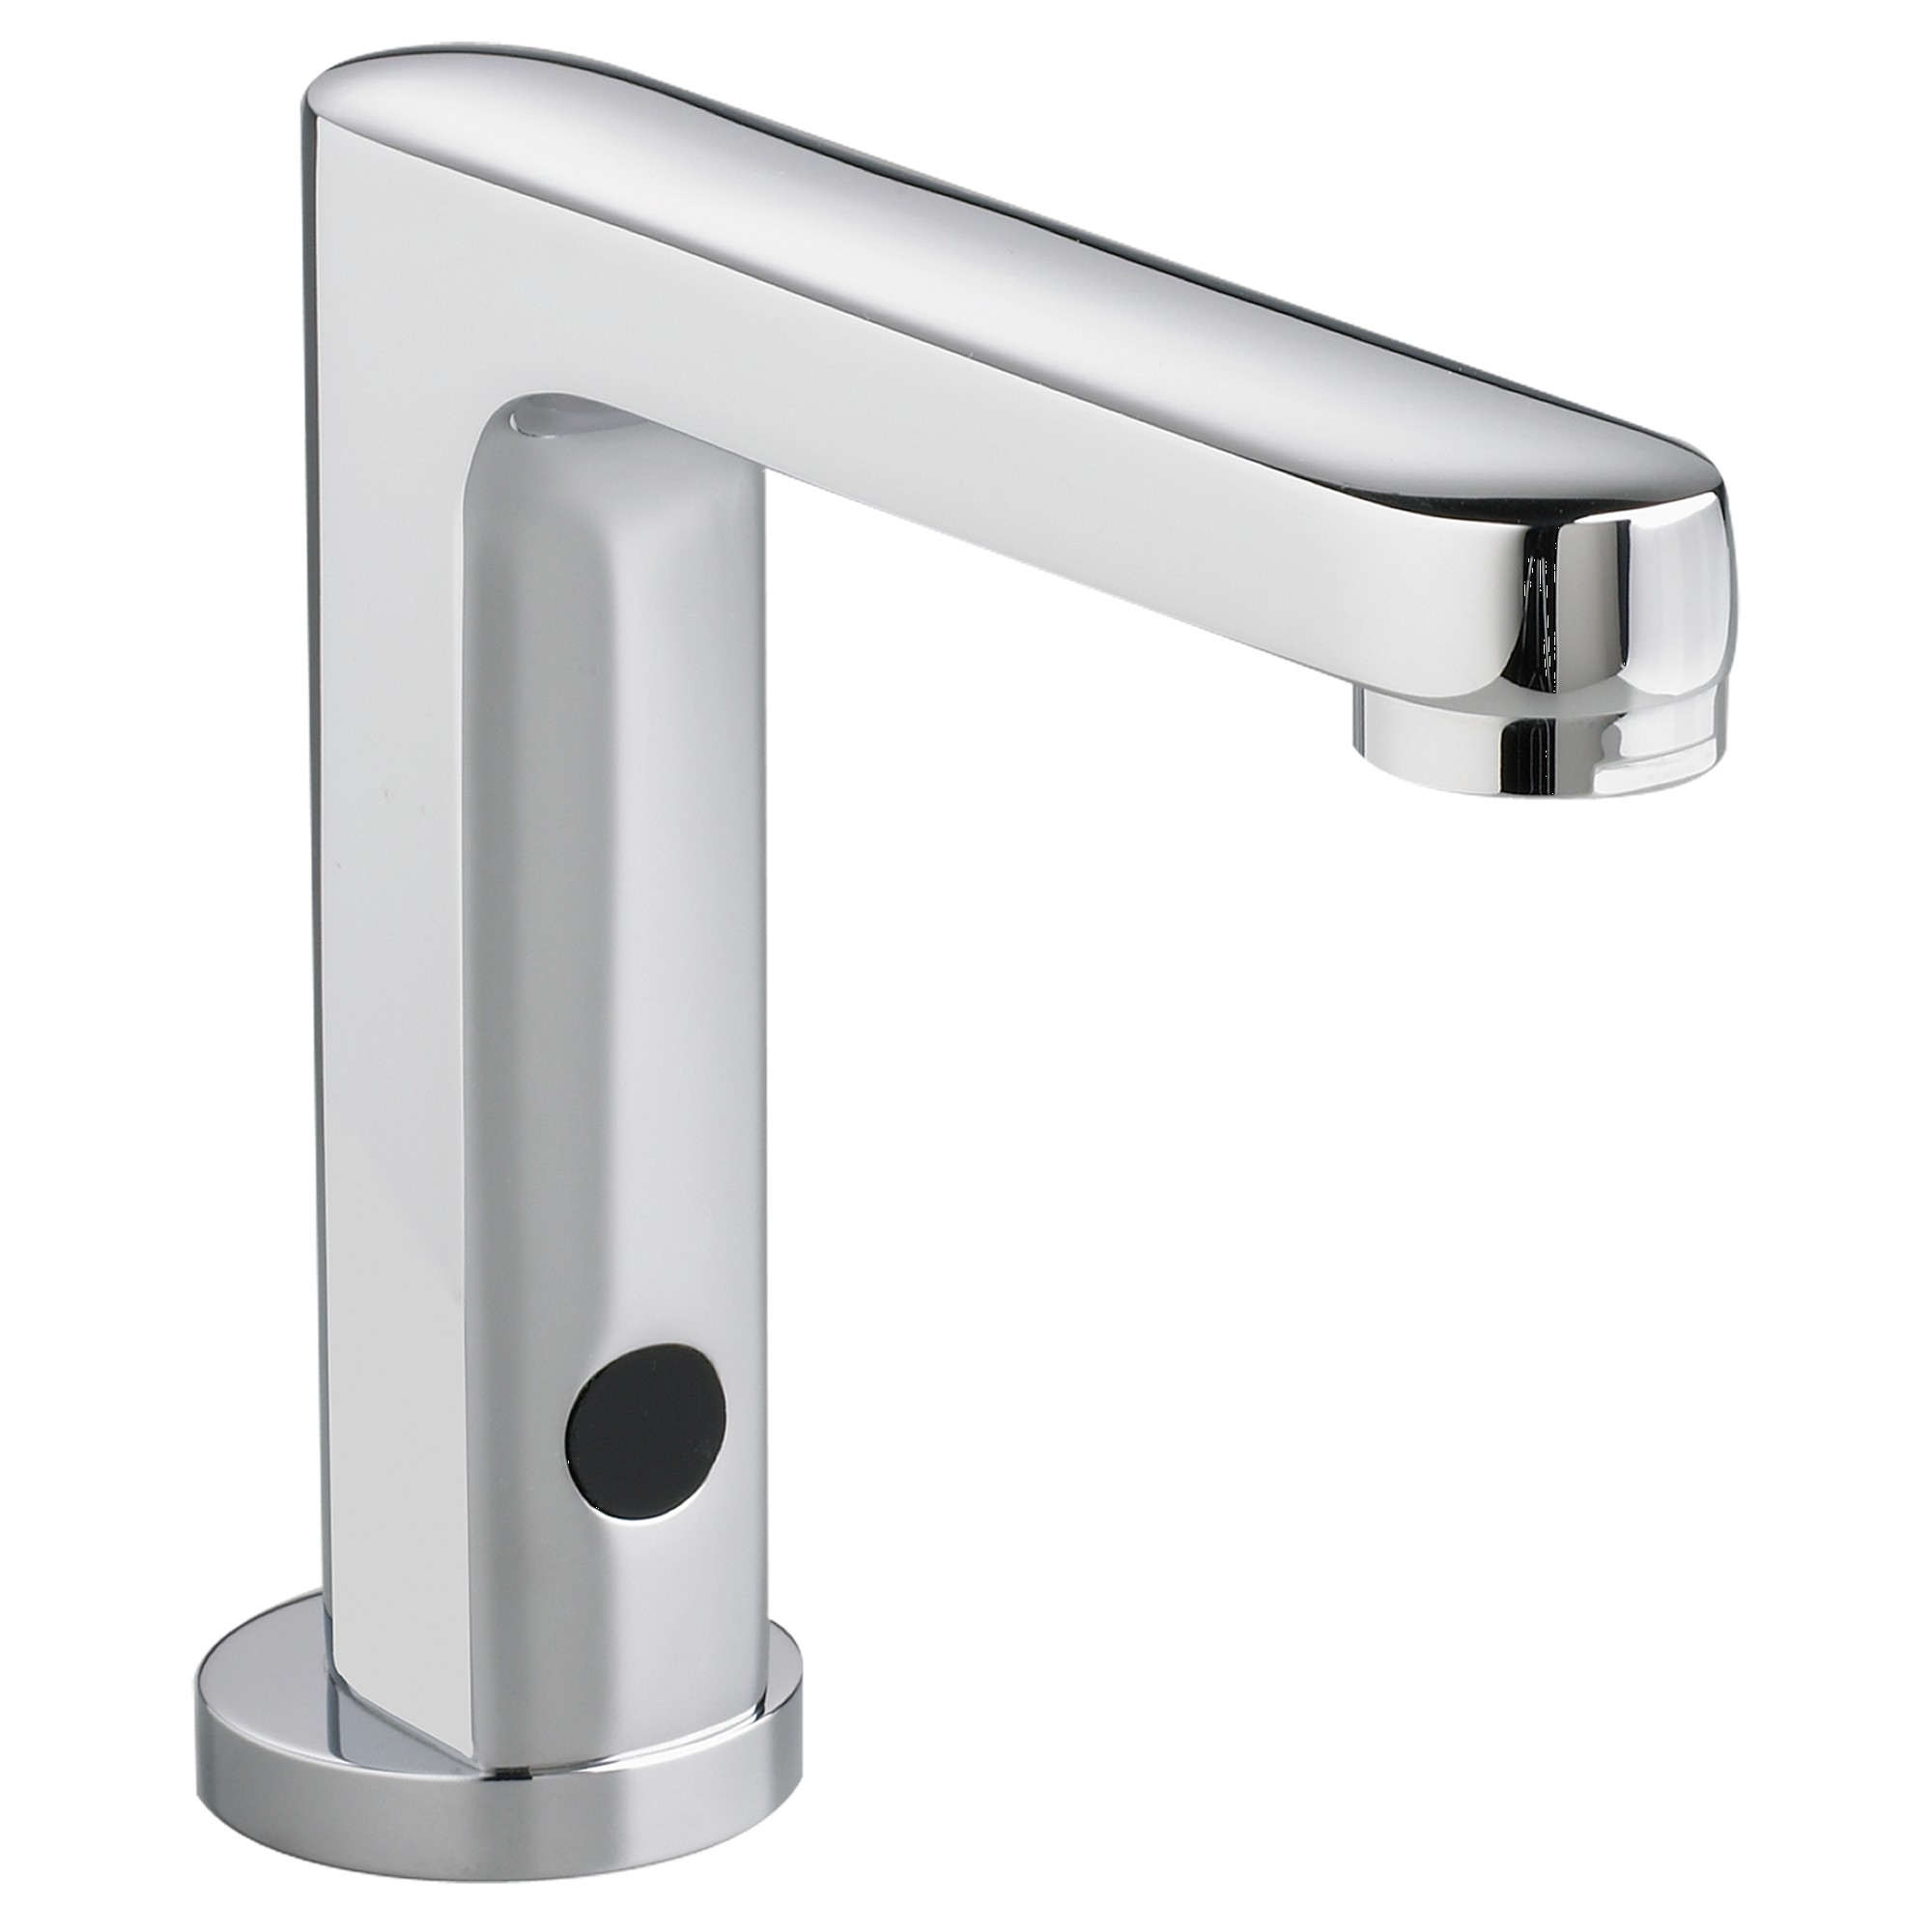 American Standard | 2506.153.002 | AMERICAN STANDARD 2506.153 MOMENTS SELECTRONIC ELECTRONIC DC BATTERY LAVATORY FAUCET CP 002 CHROME 1.5GPM 